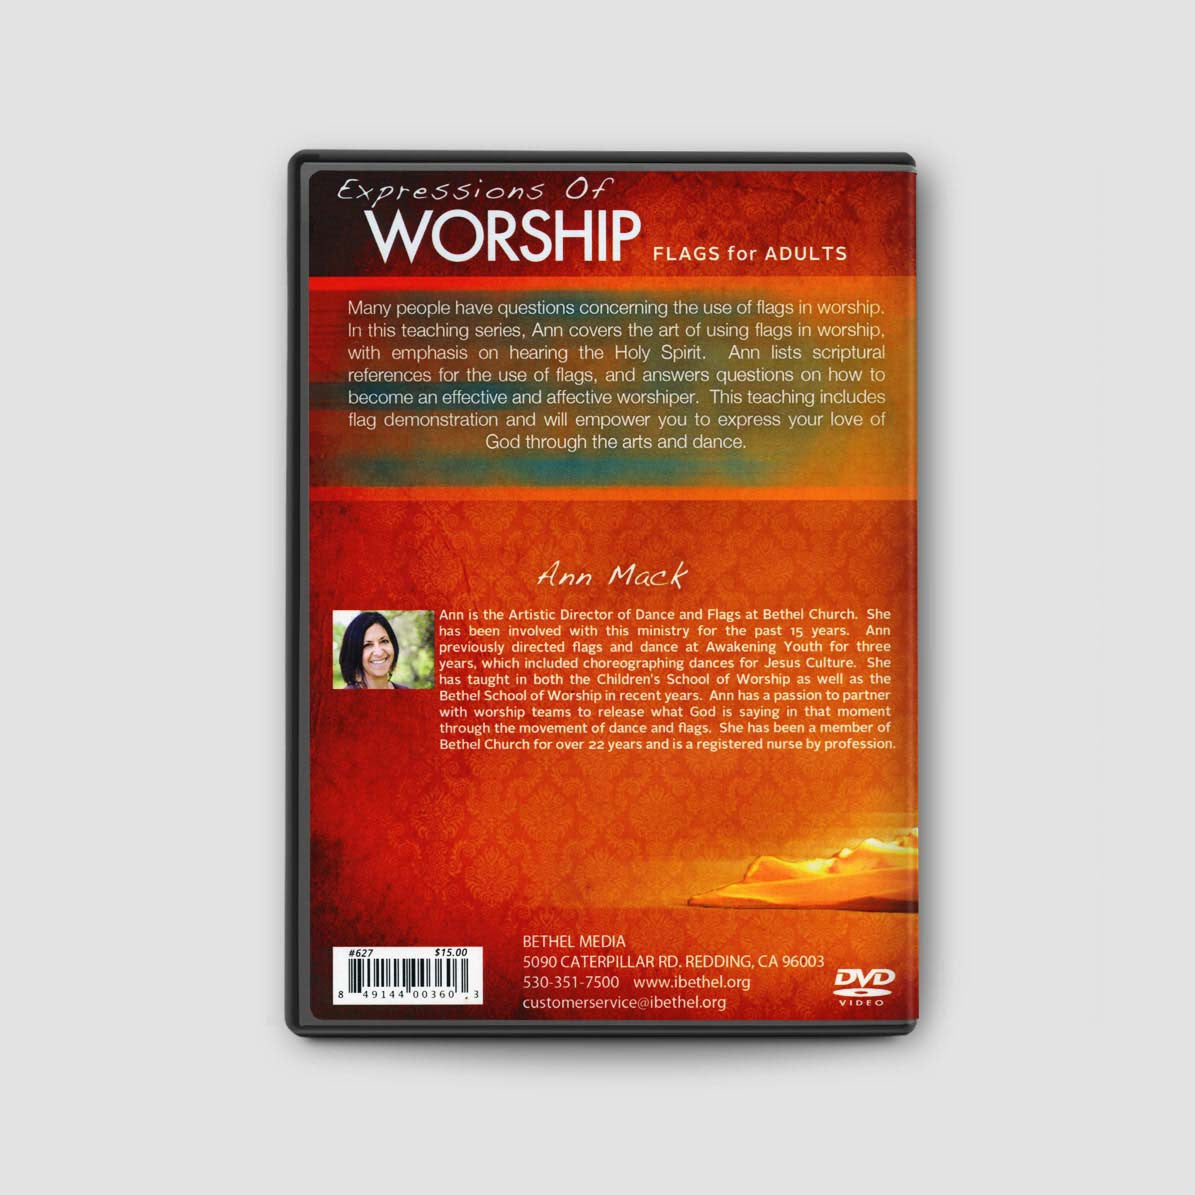 Expressions of Worship: Flags for Adults